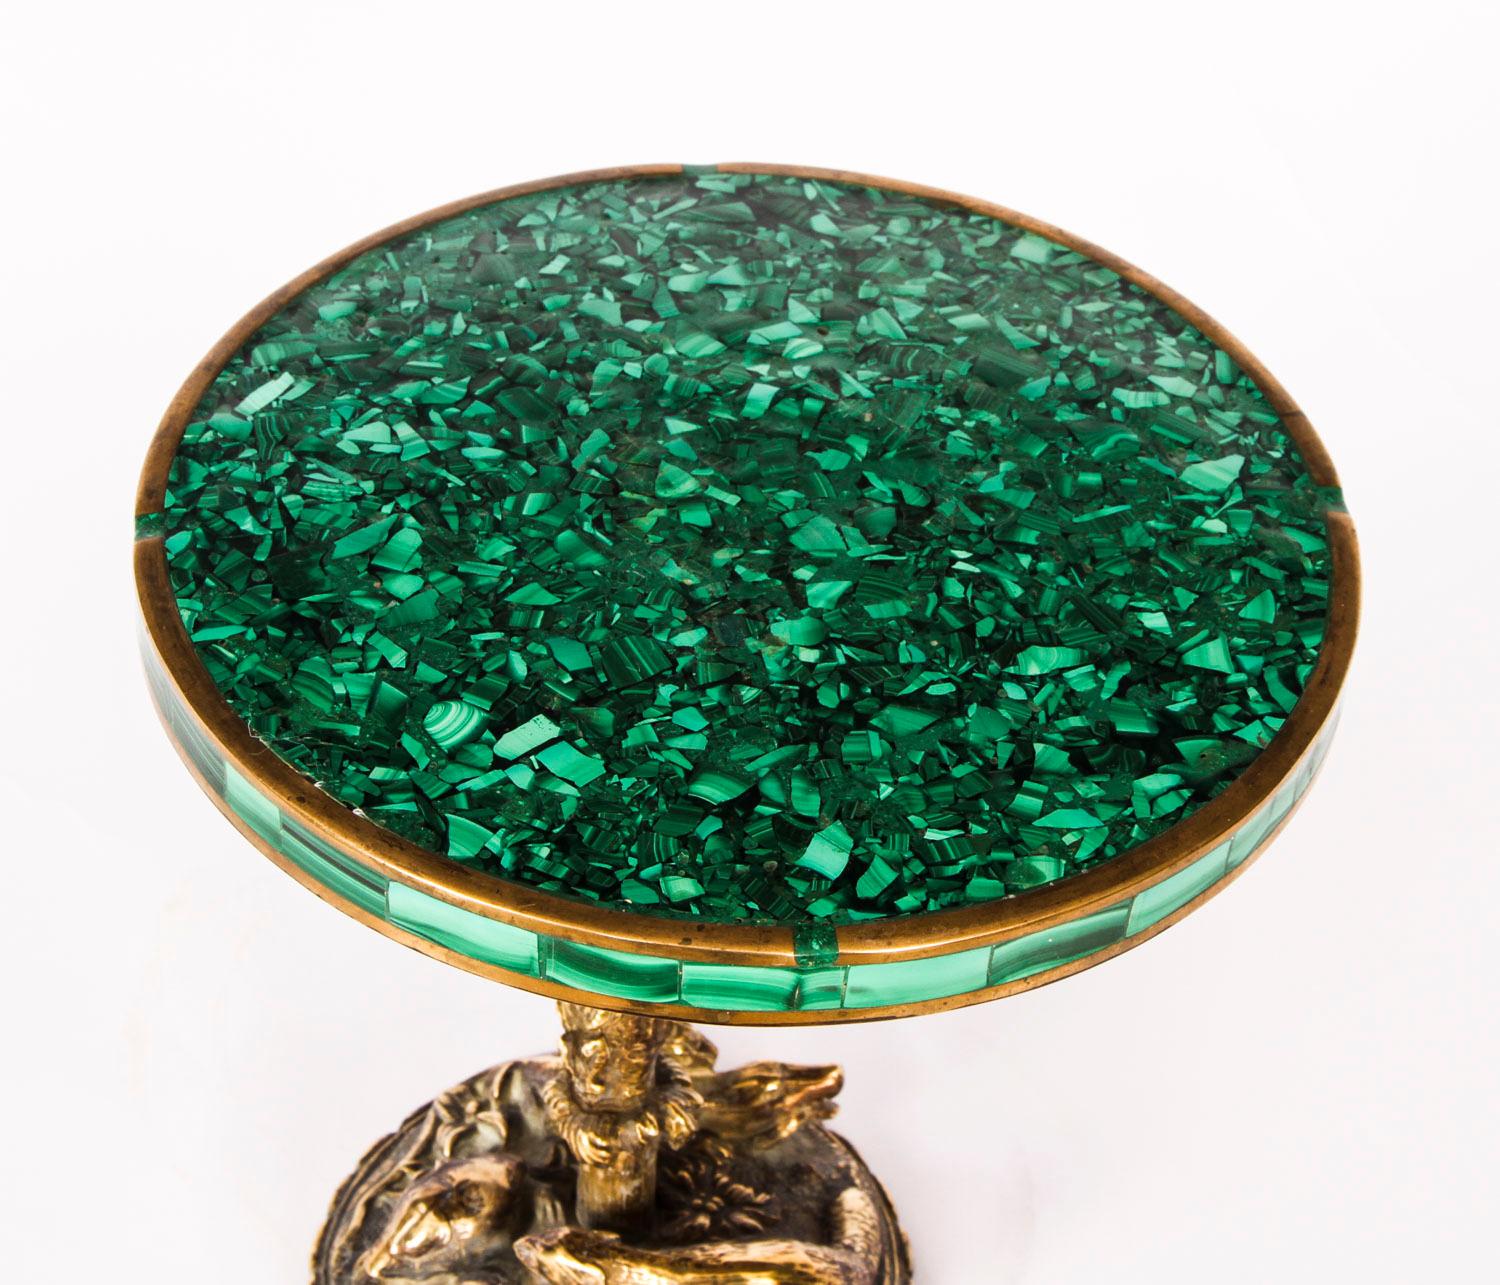 A French ormolu and malachite miniature table circa 1880 in date.

The miniature table with circular malachite top and border, the ormolu base cast in the Naturalist manner with a monkey climbing a tree, above a 'Palissy-esque' arrangement of